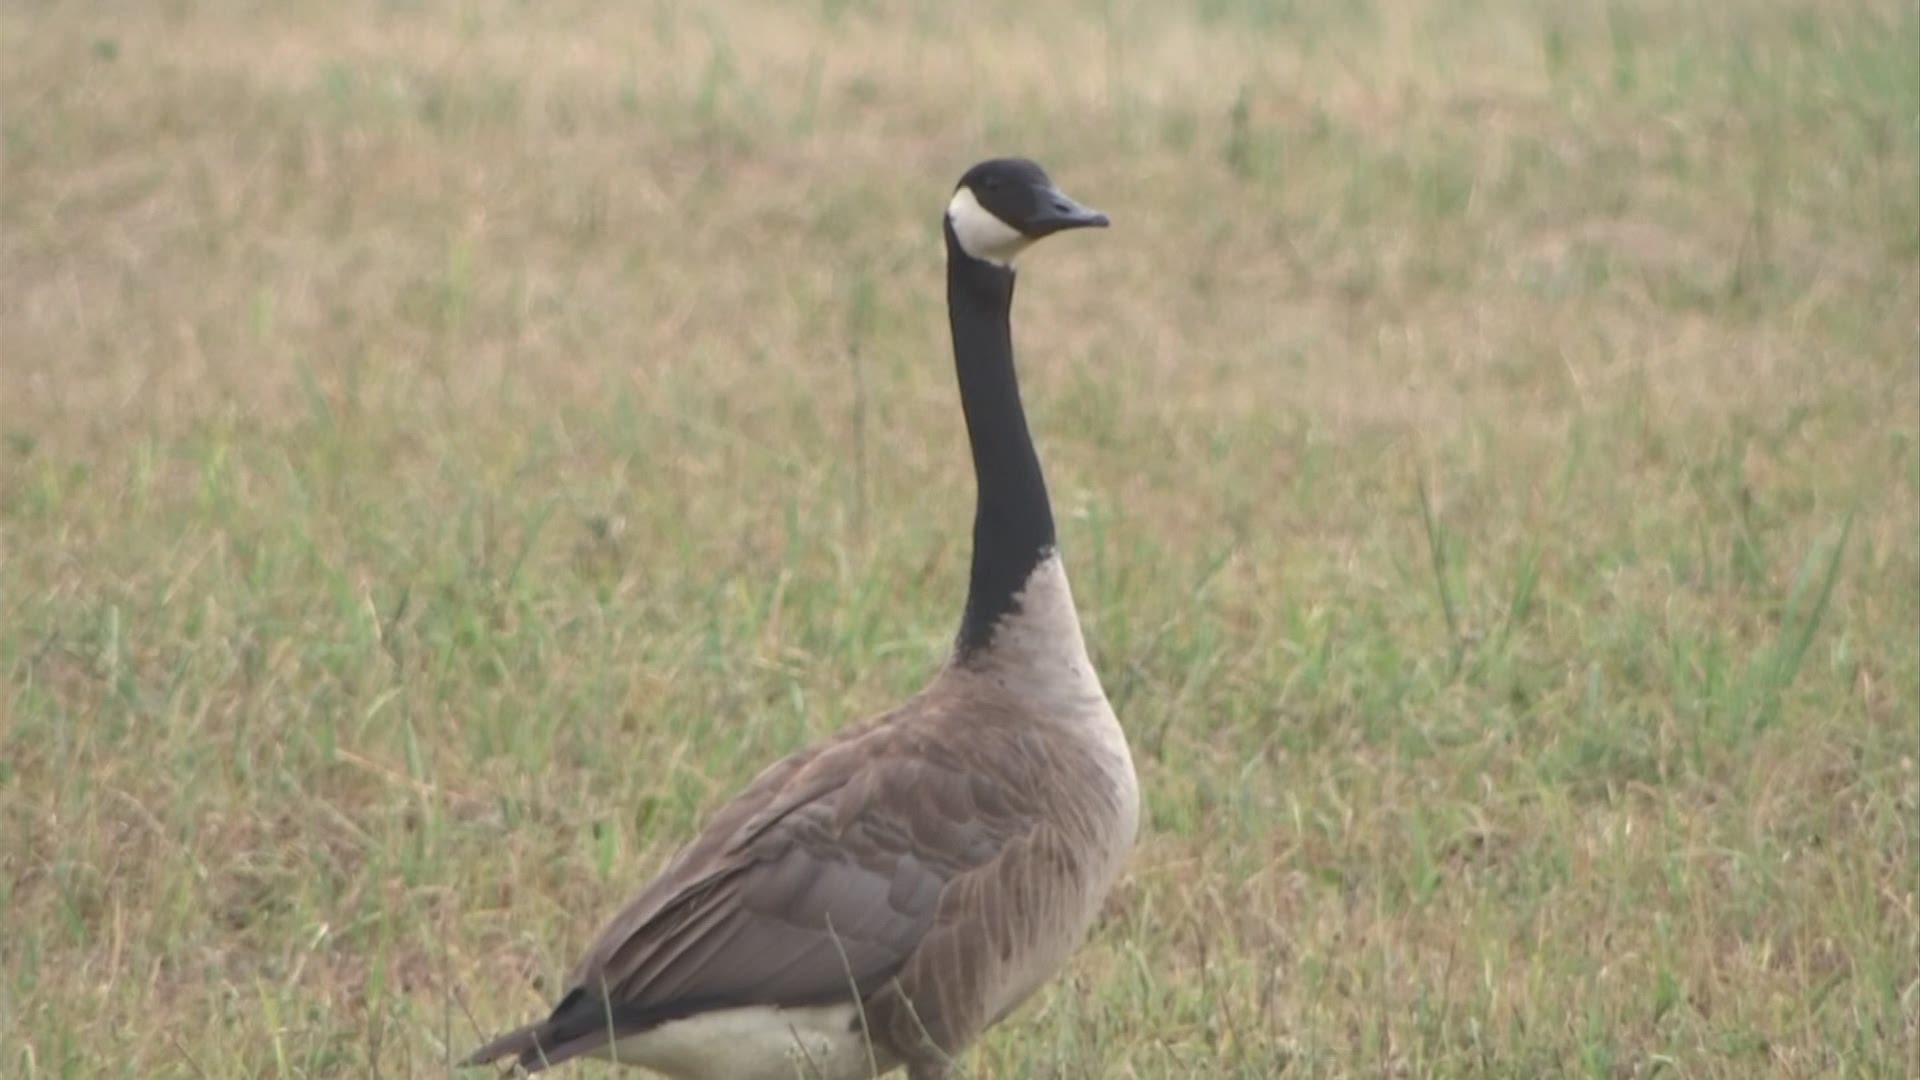 Did you know you could be fined up to $250 and spend 30 days in jail for intentionally running over a goose?